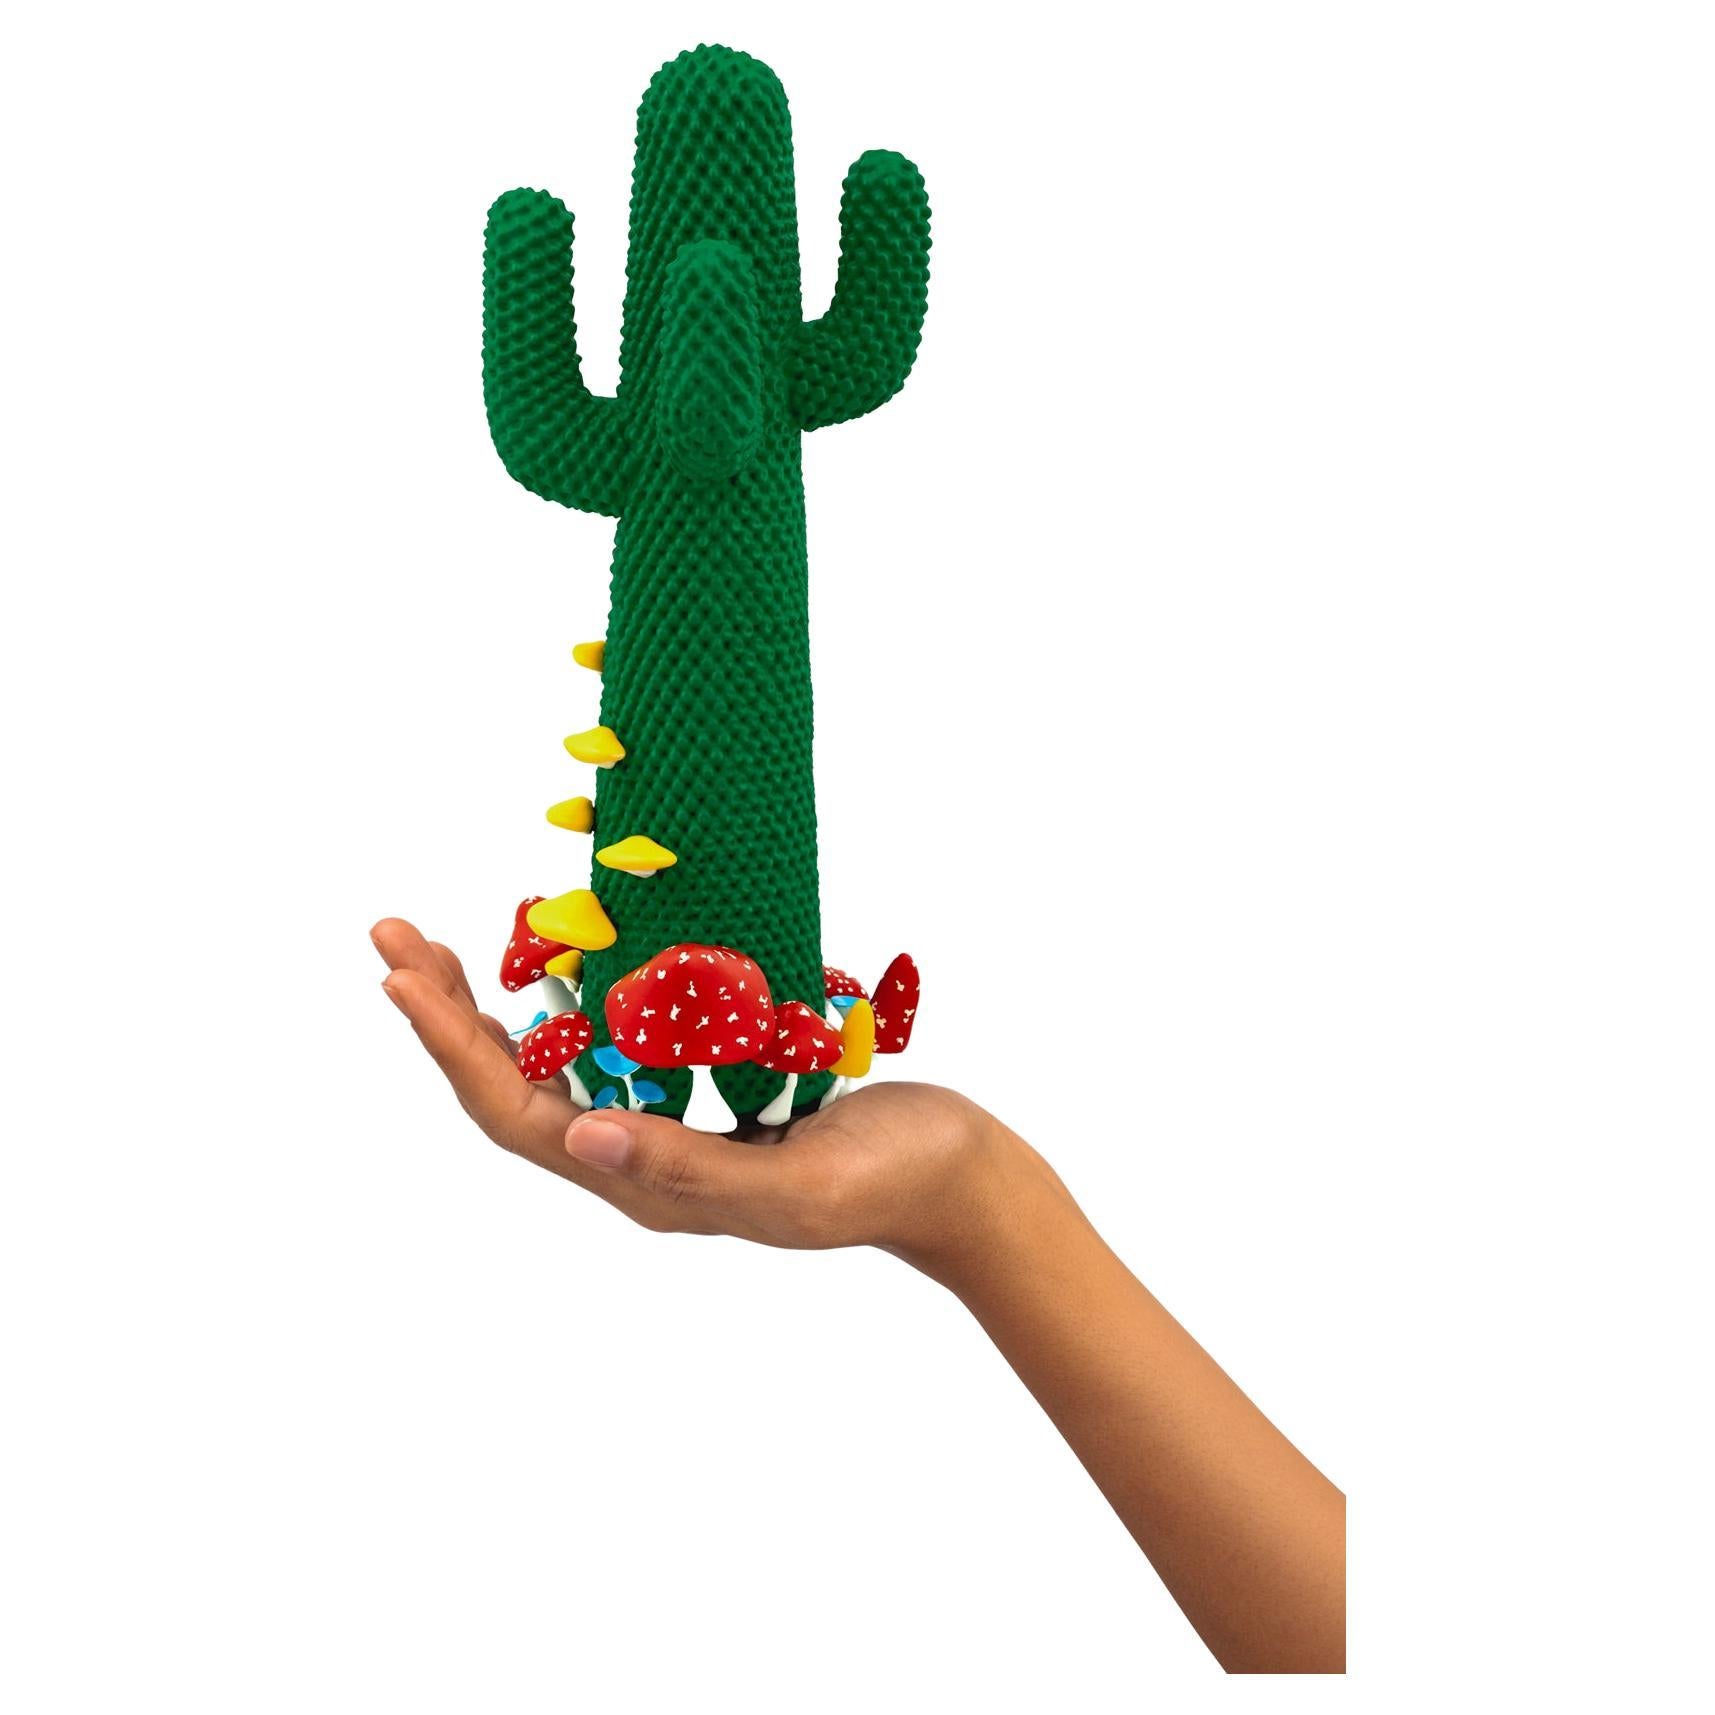 LIMITED EDITION #50/99

Gufram presents the miniaturised version of the Shroom CACTUS® created in collaboration with A$AP Rocky and the artist’s new design studio HOMMEMADE Exactly as the real-size Shroom CACTUS®, the new Guframini piece features